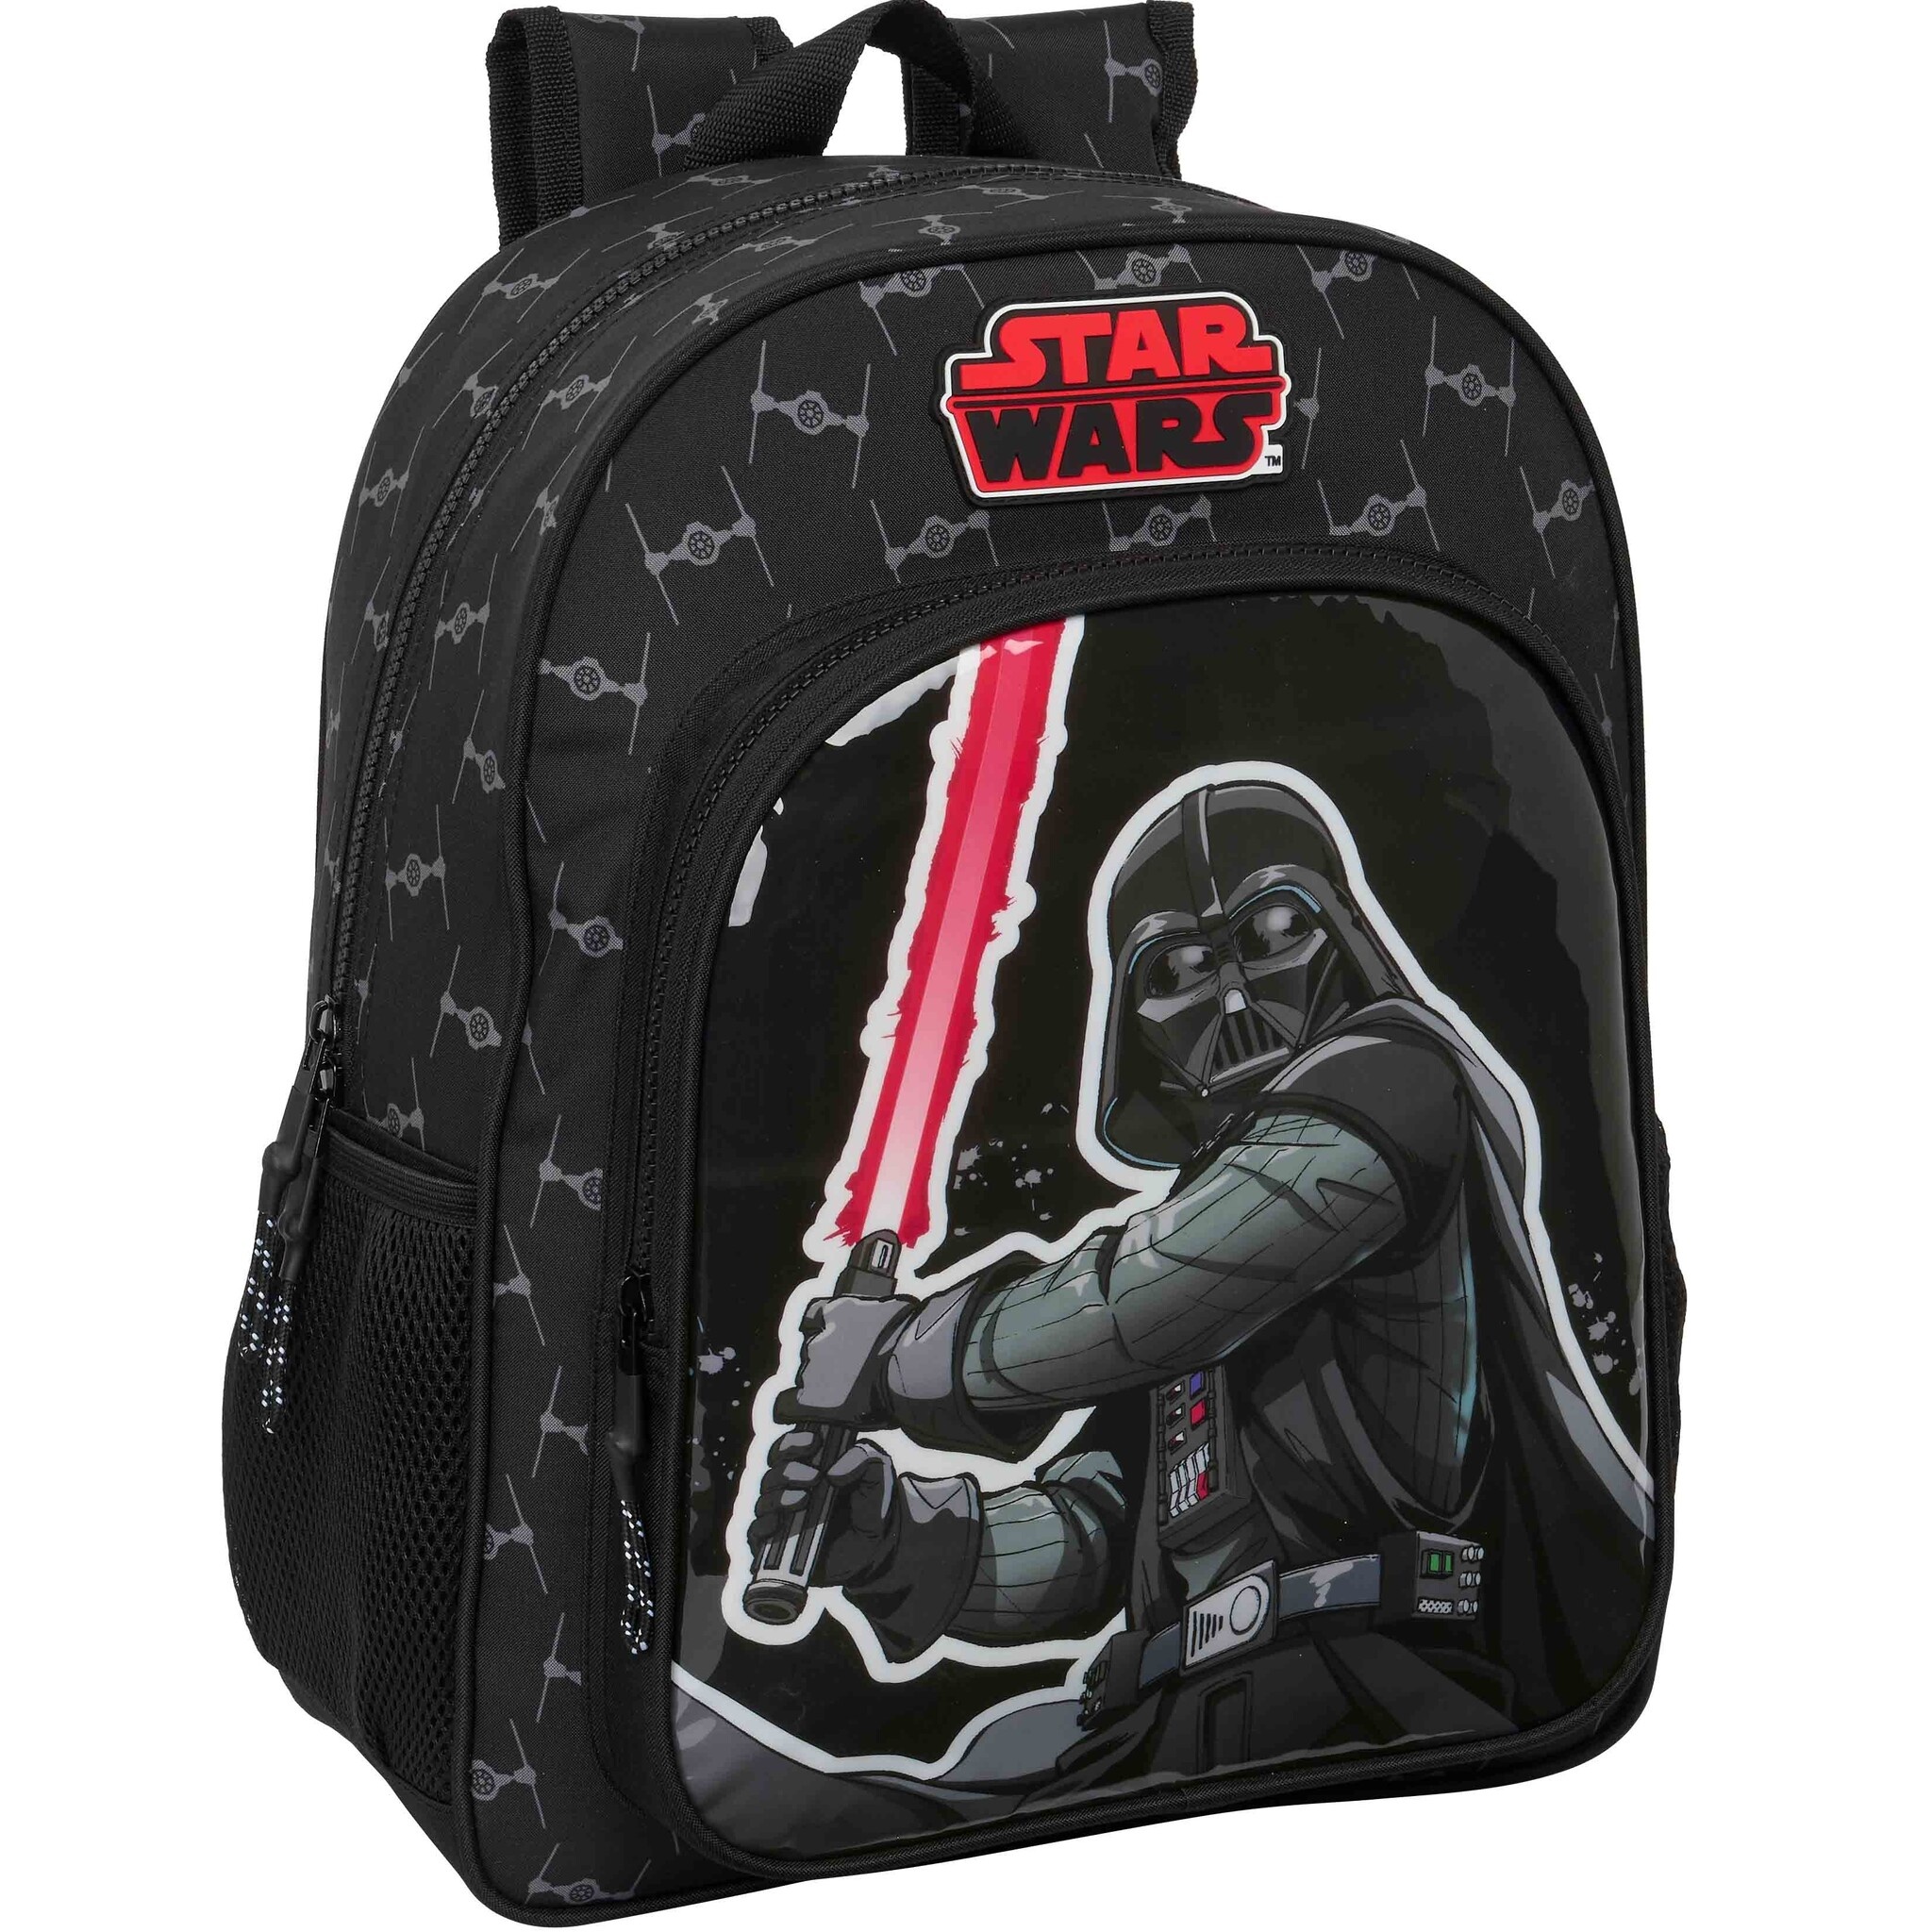 Star wars Backpack, The Fighter - 38 x 32 x 12 cm - Polyester